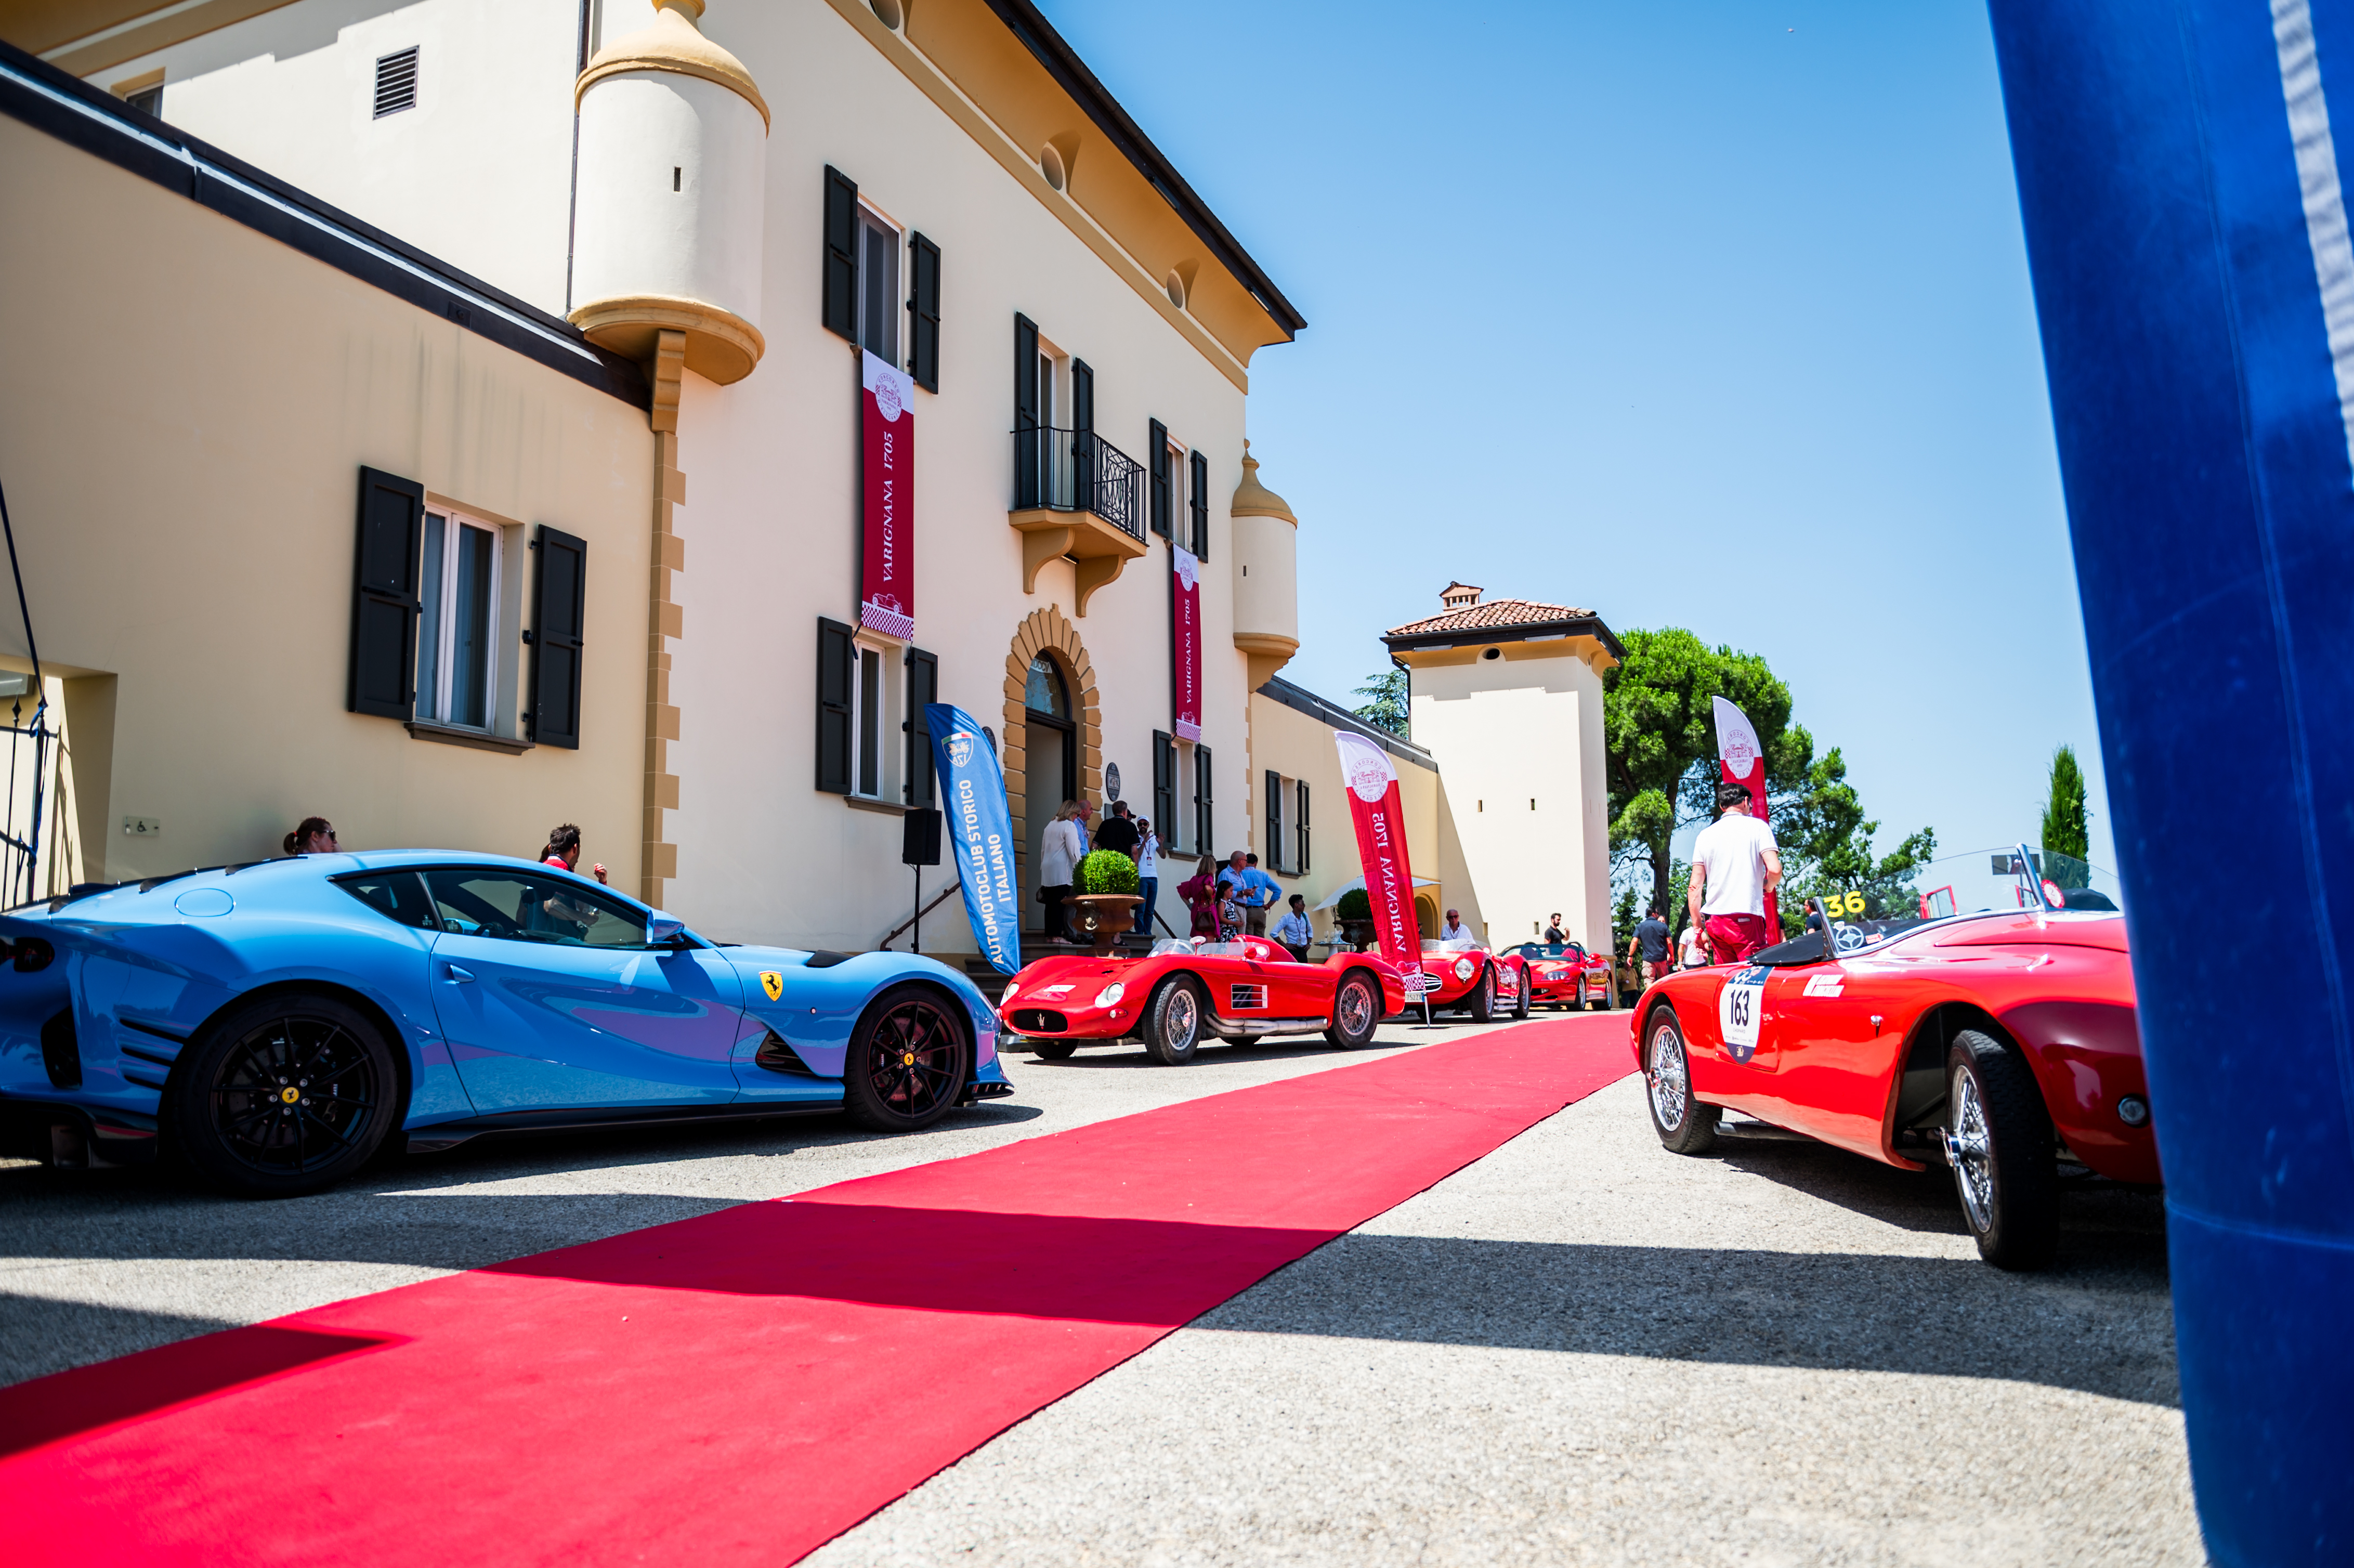 The World’s Most Exclusive Concours Event Returns: 2024 Concorso d’Eleganza Varignana 1705 Dates and Jury Announced